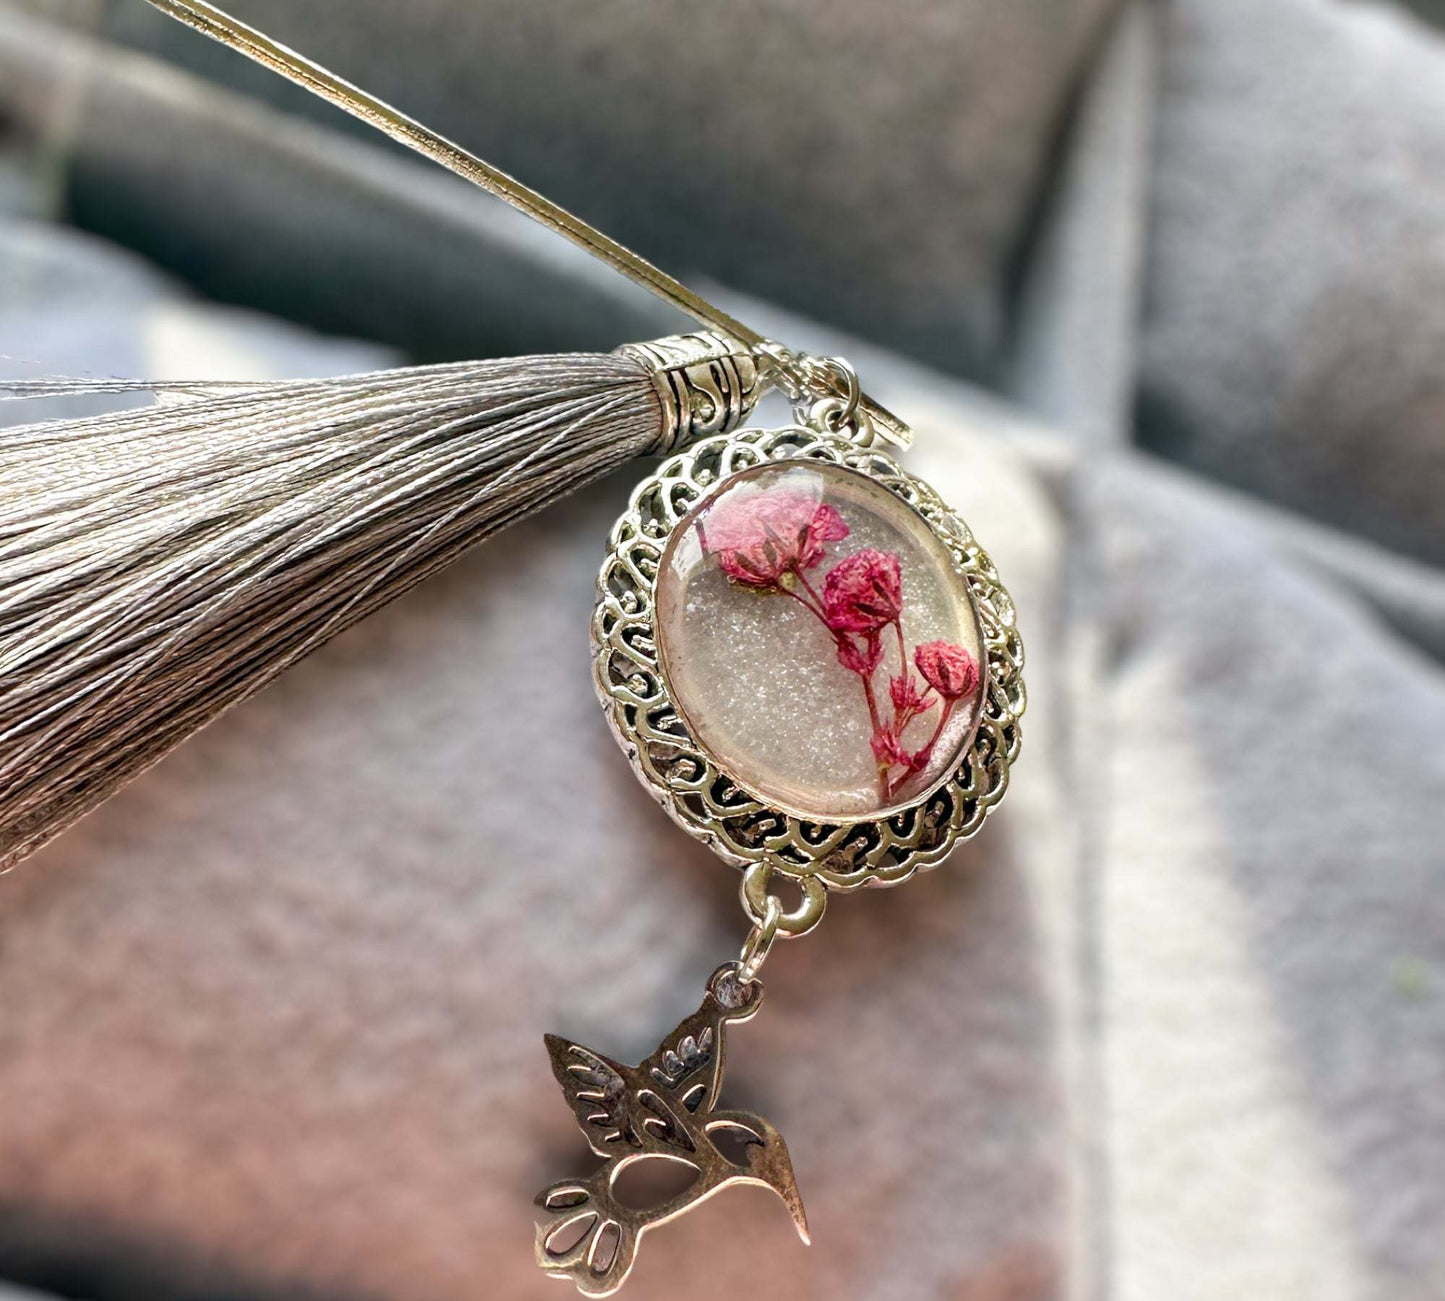 Bookmark Blooms in Books: Handcrafted Floral Delights with Charms